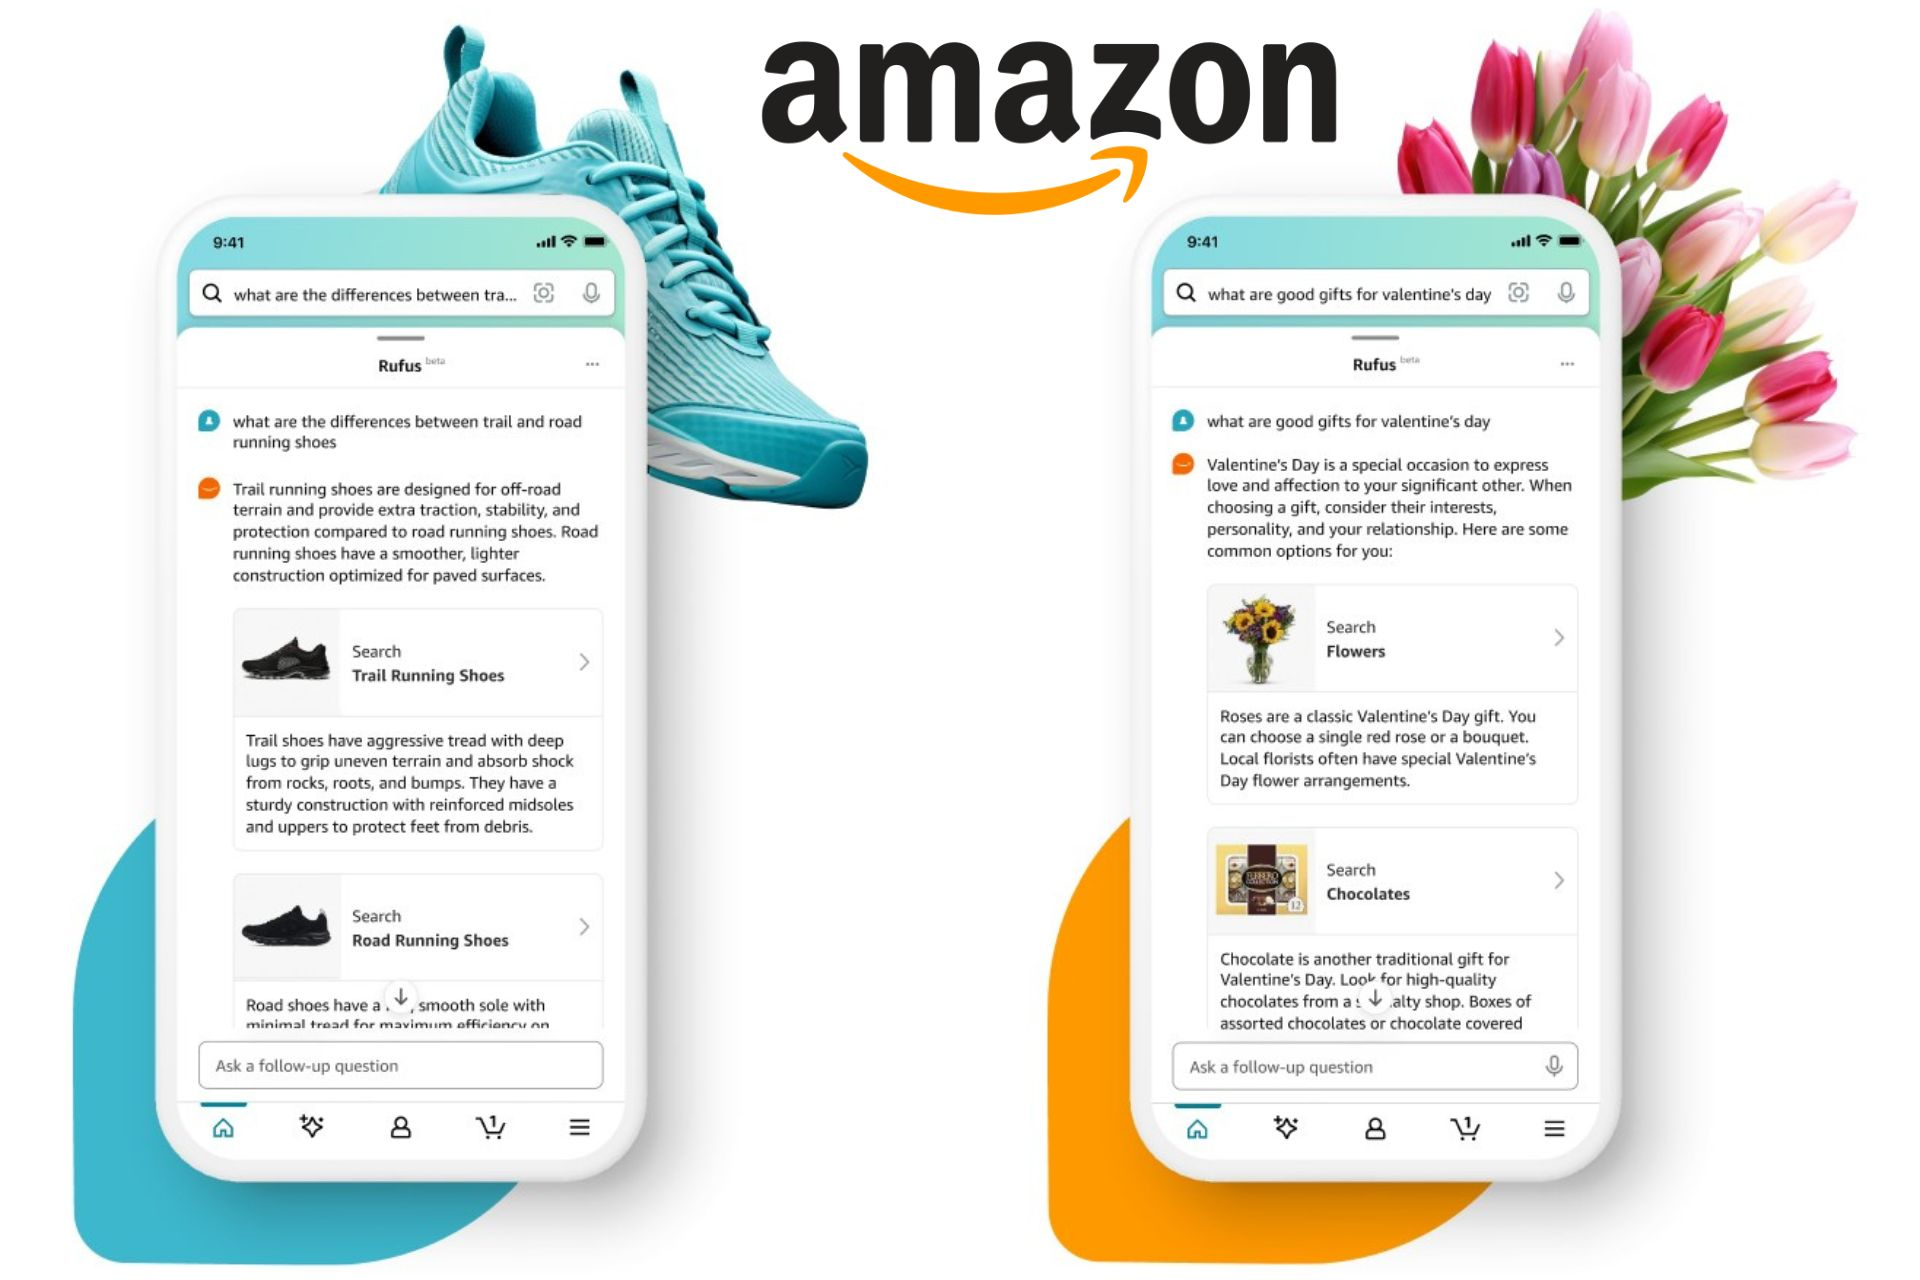 Rufus AI Shopping Assistant by Amazon